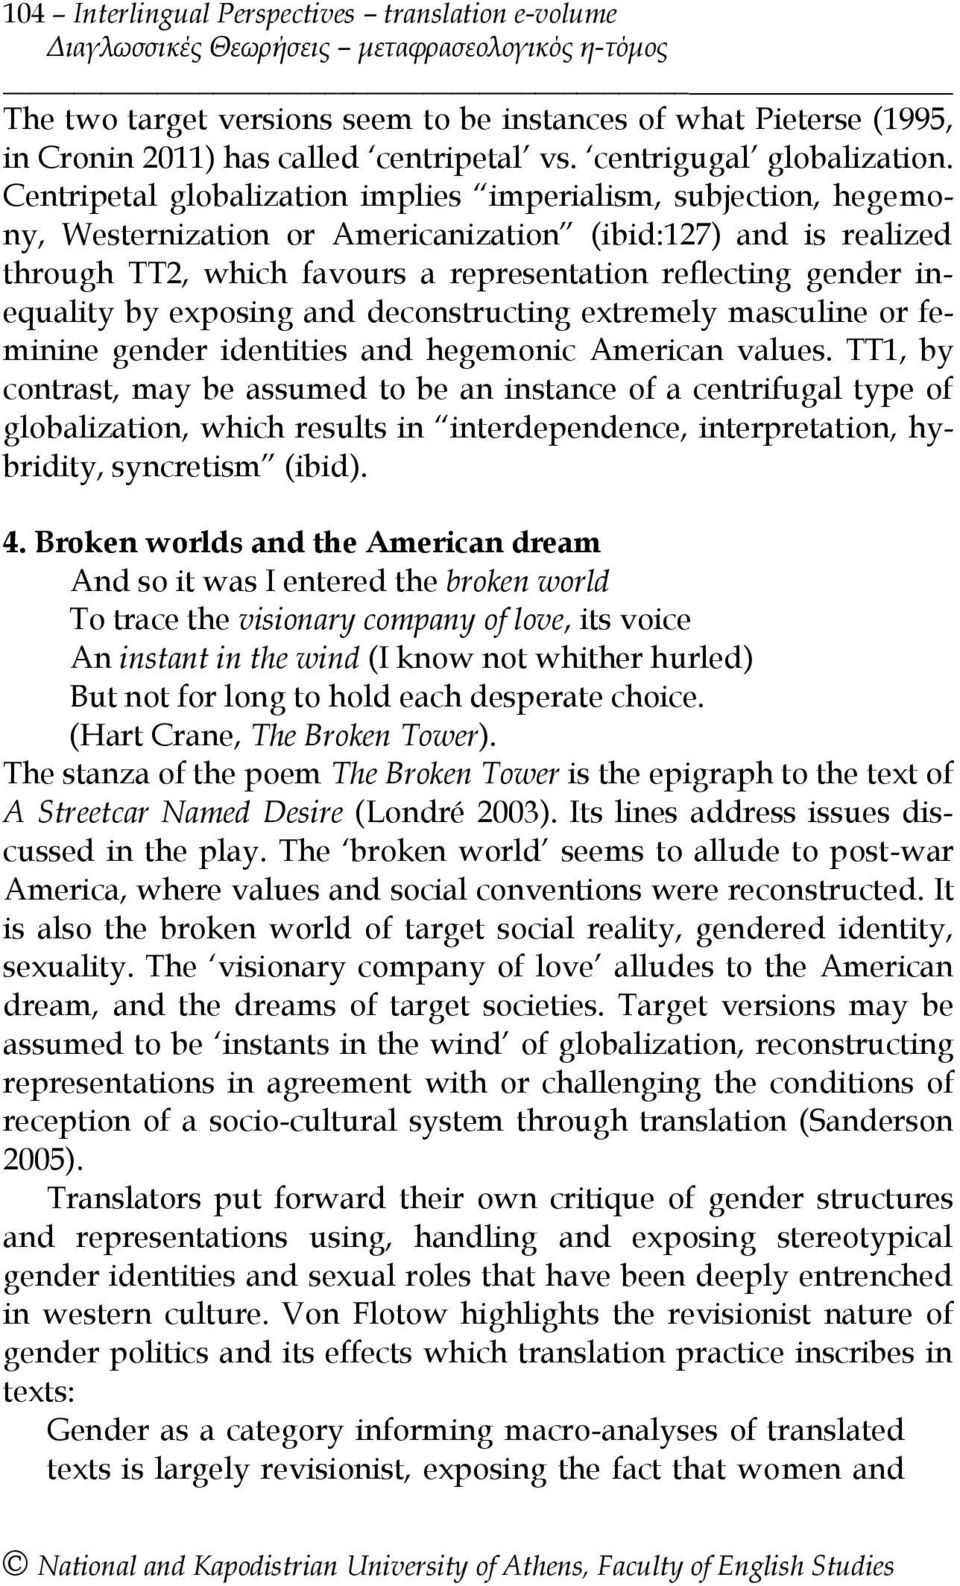 Centripetal globalization implies imperialism, subjection, hegemony, Westernization or Americanization (ibid:127) and is realized through TT2, which favours a representation reflecting gender